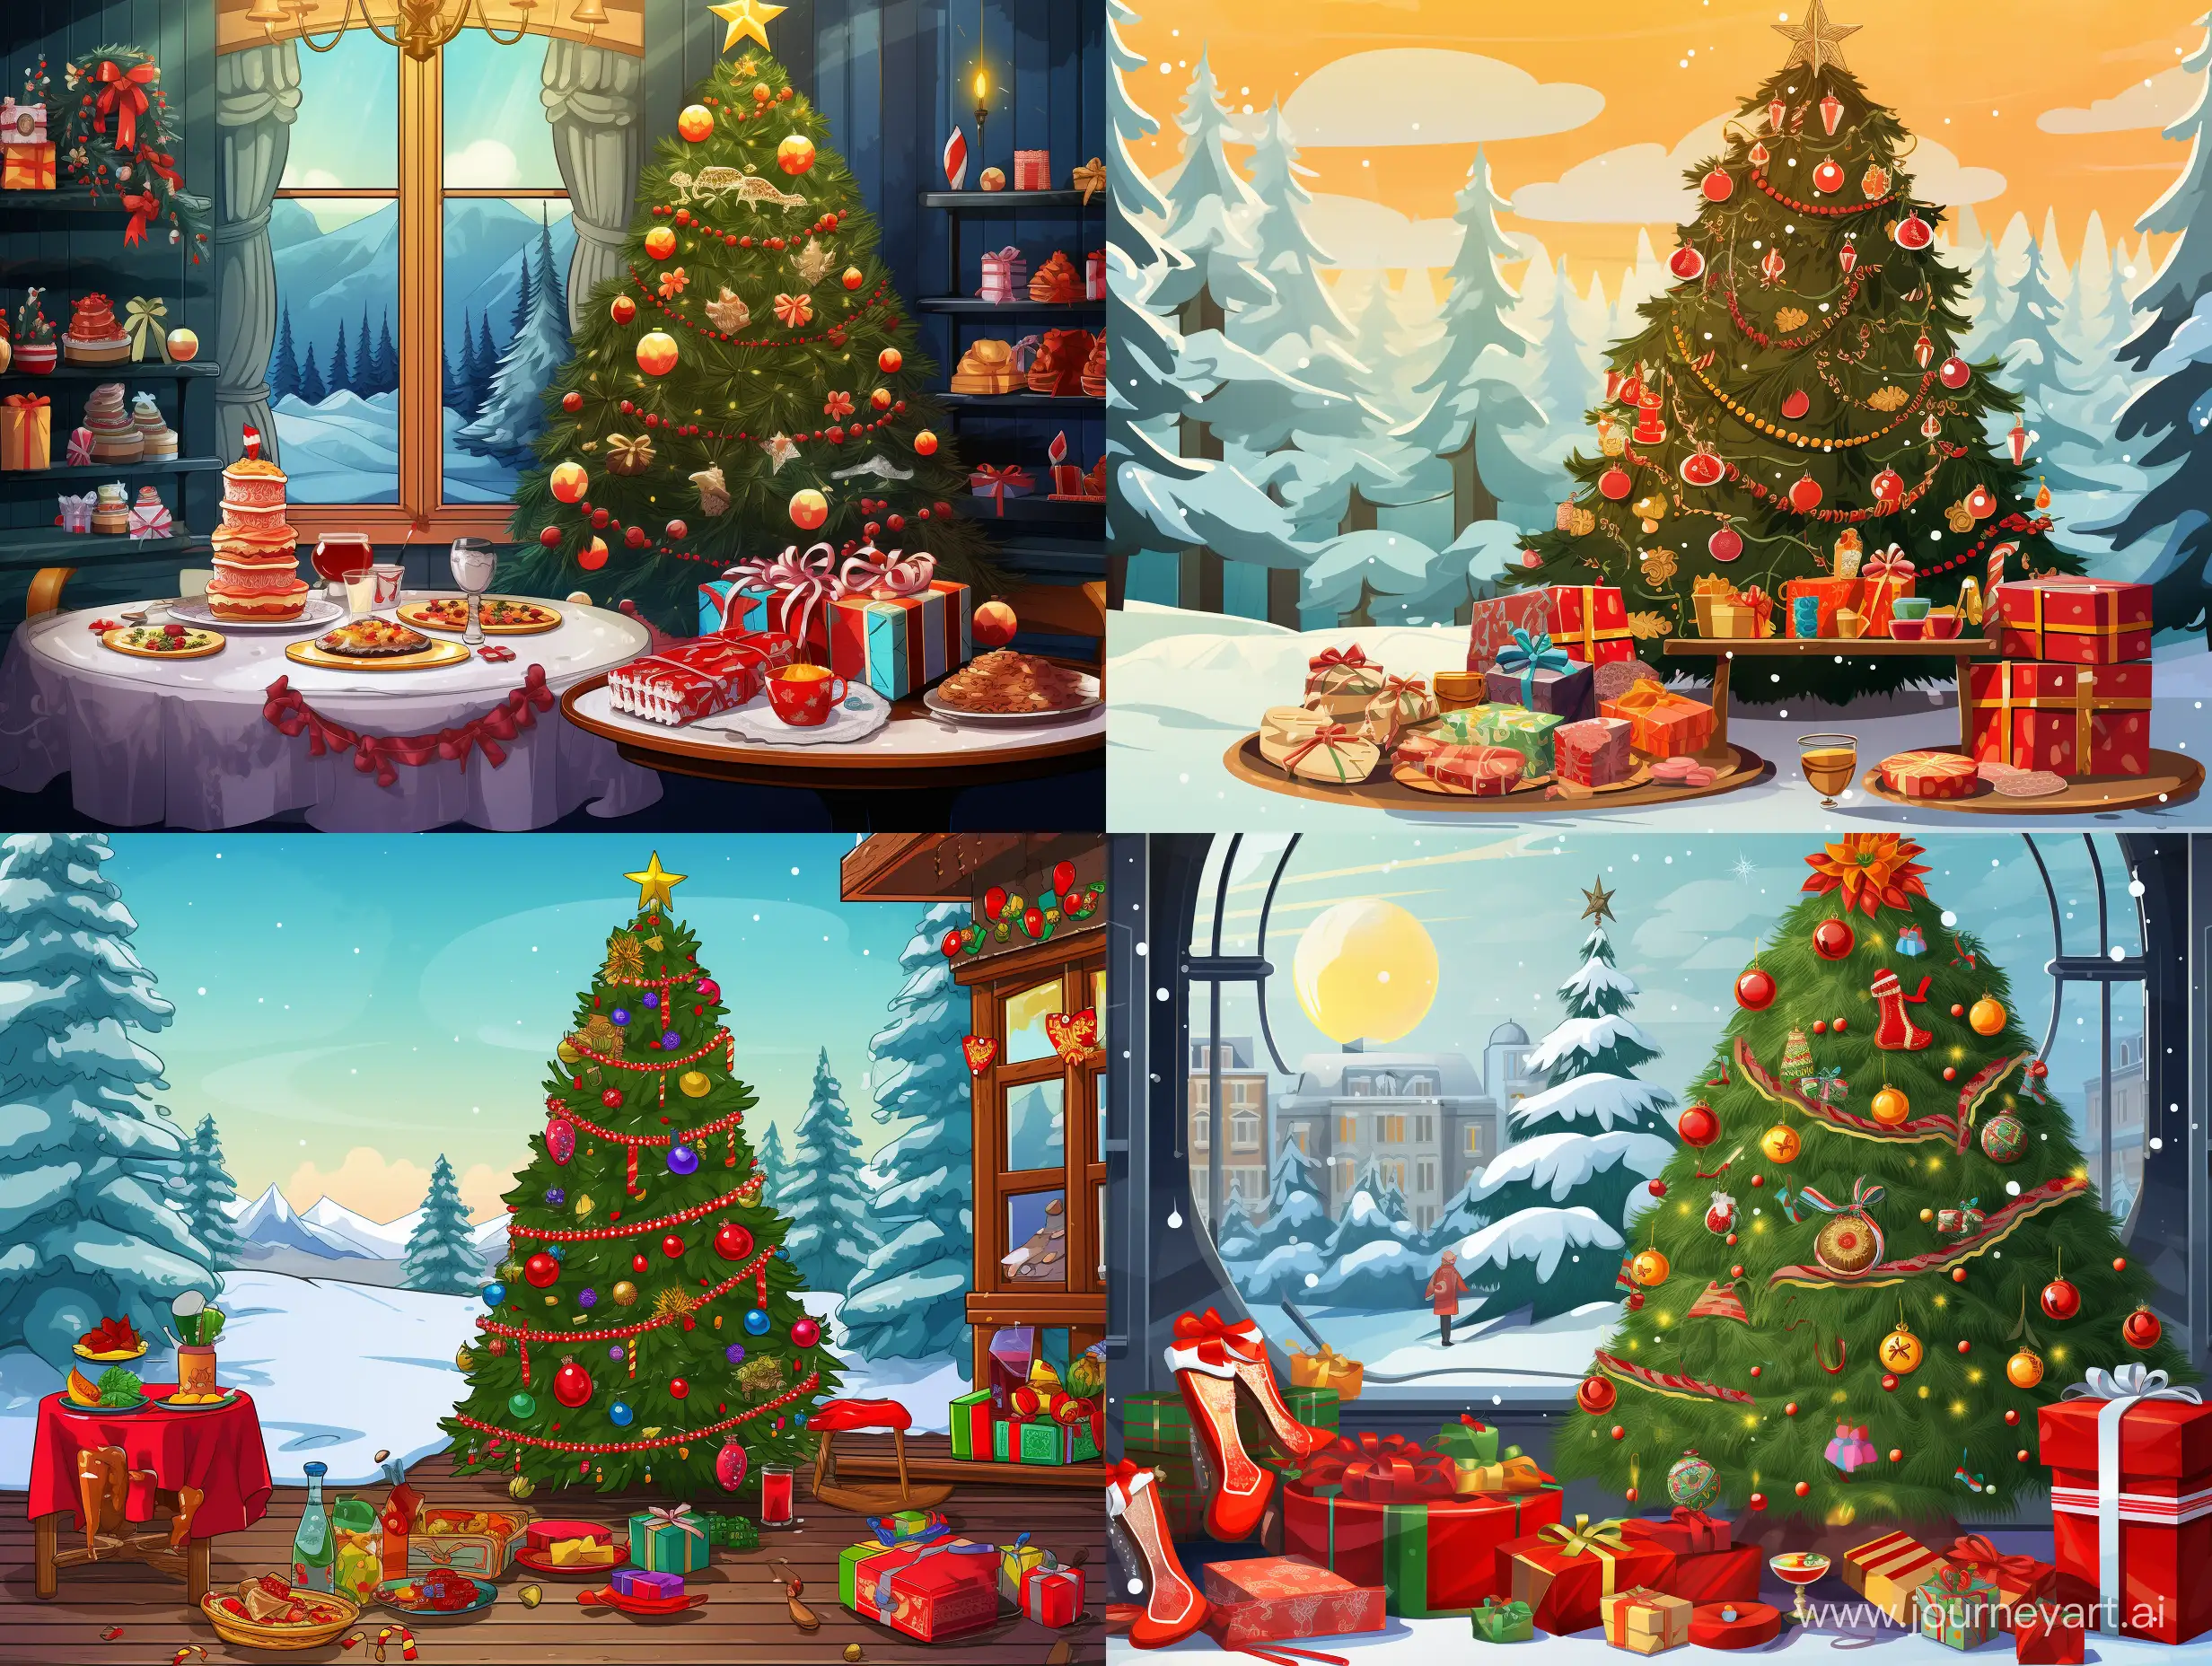 Festive-New-Year-Collage-Christmas-Tree-Fireworks-and-Diverse-Activities